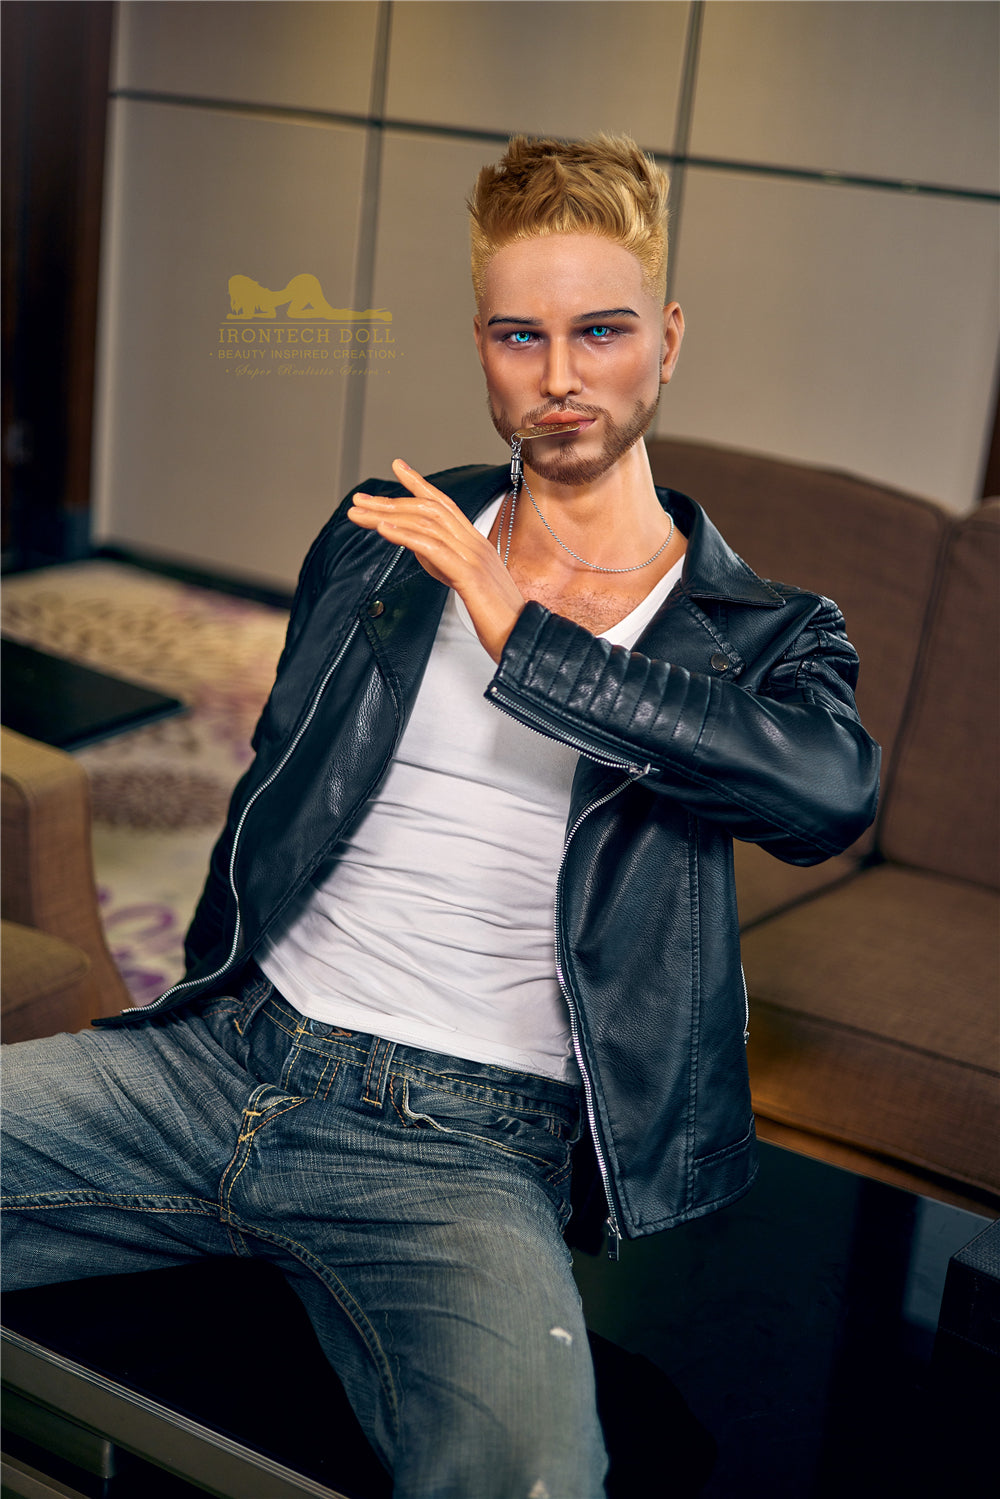 Irontech Doll 176 cm Silicone - Male Kevin | Sex Dolls SG